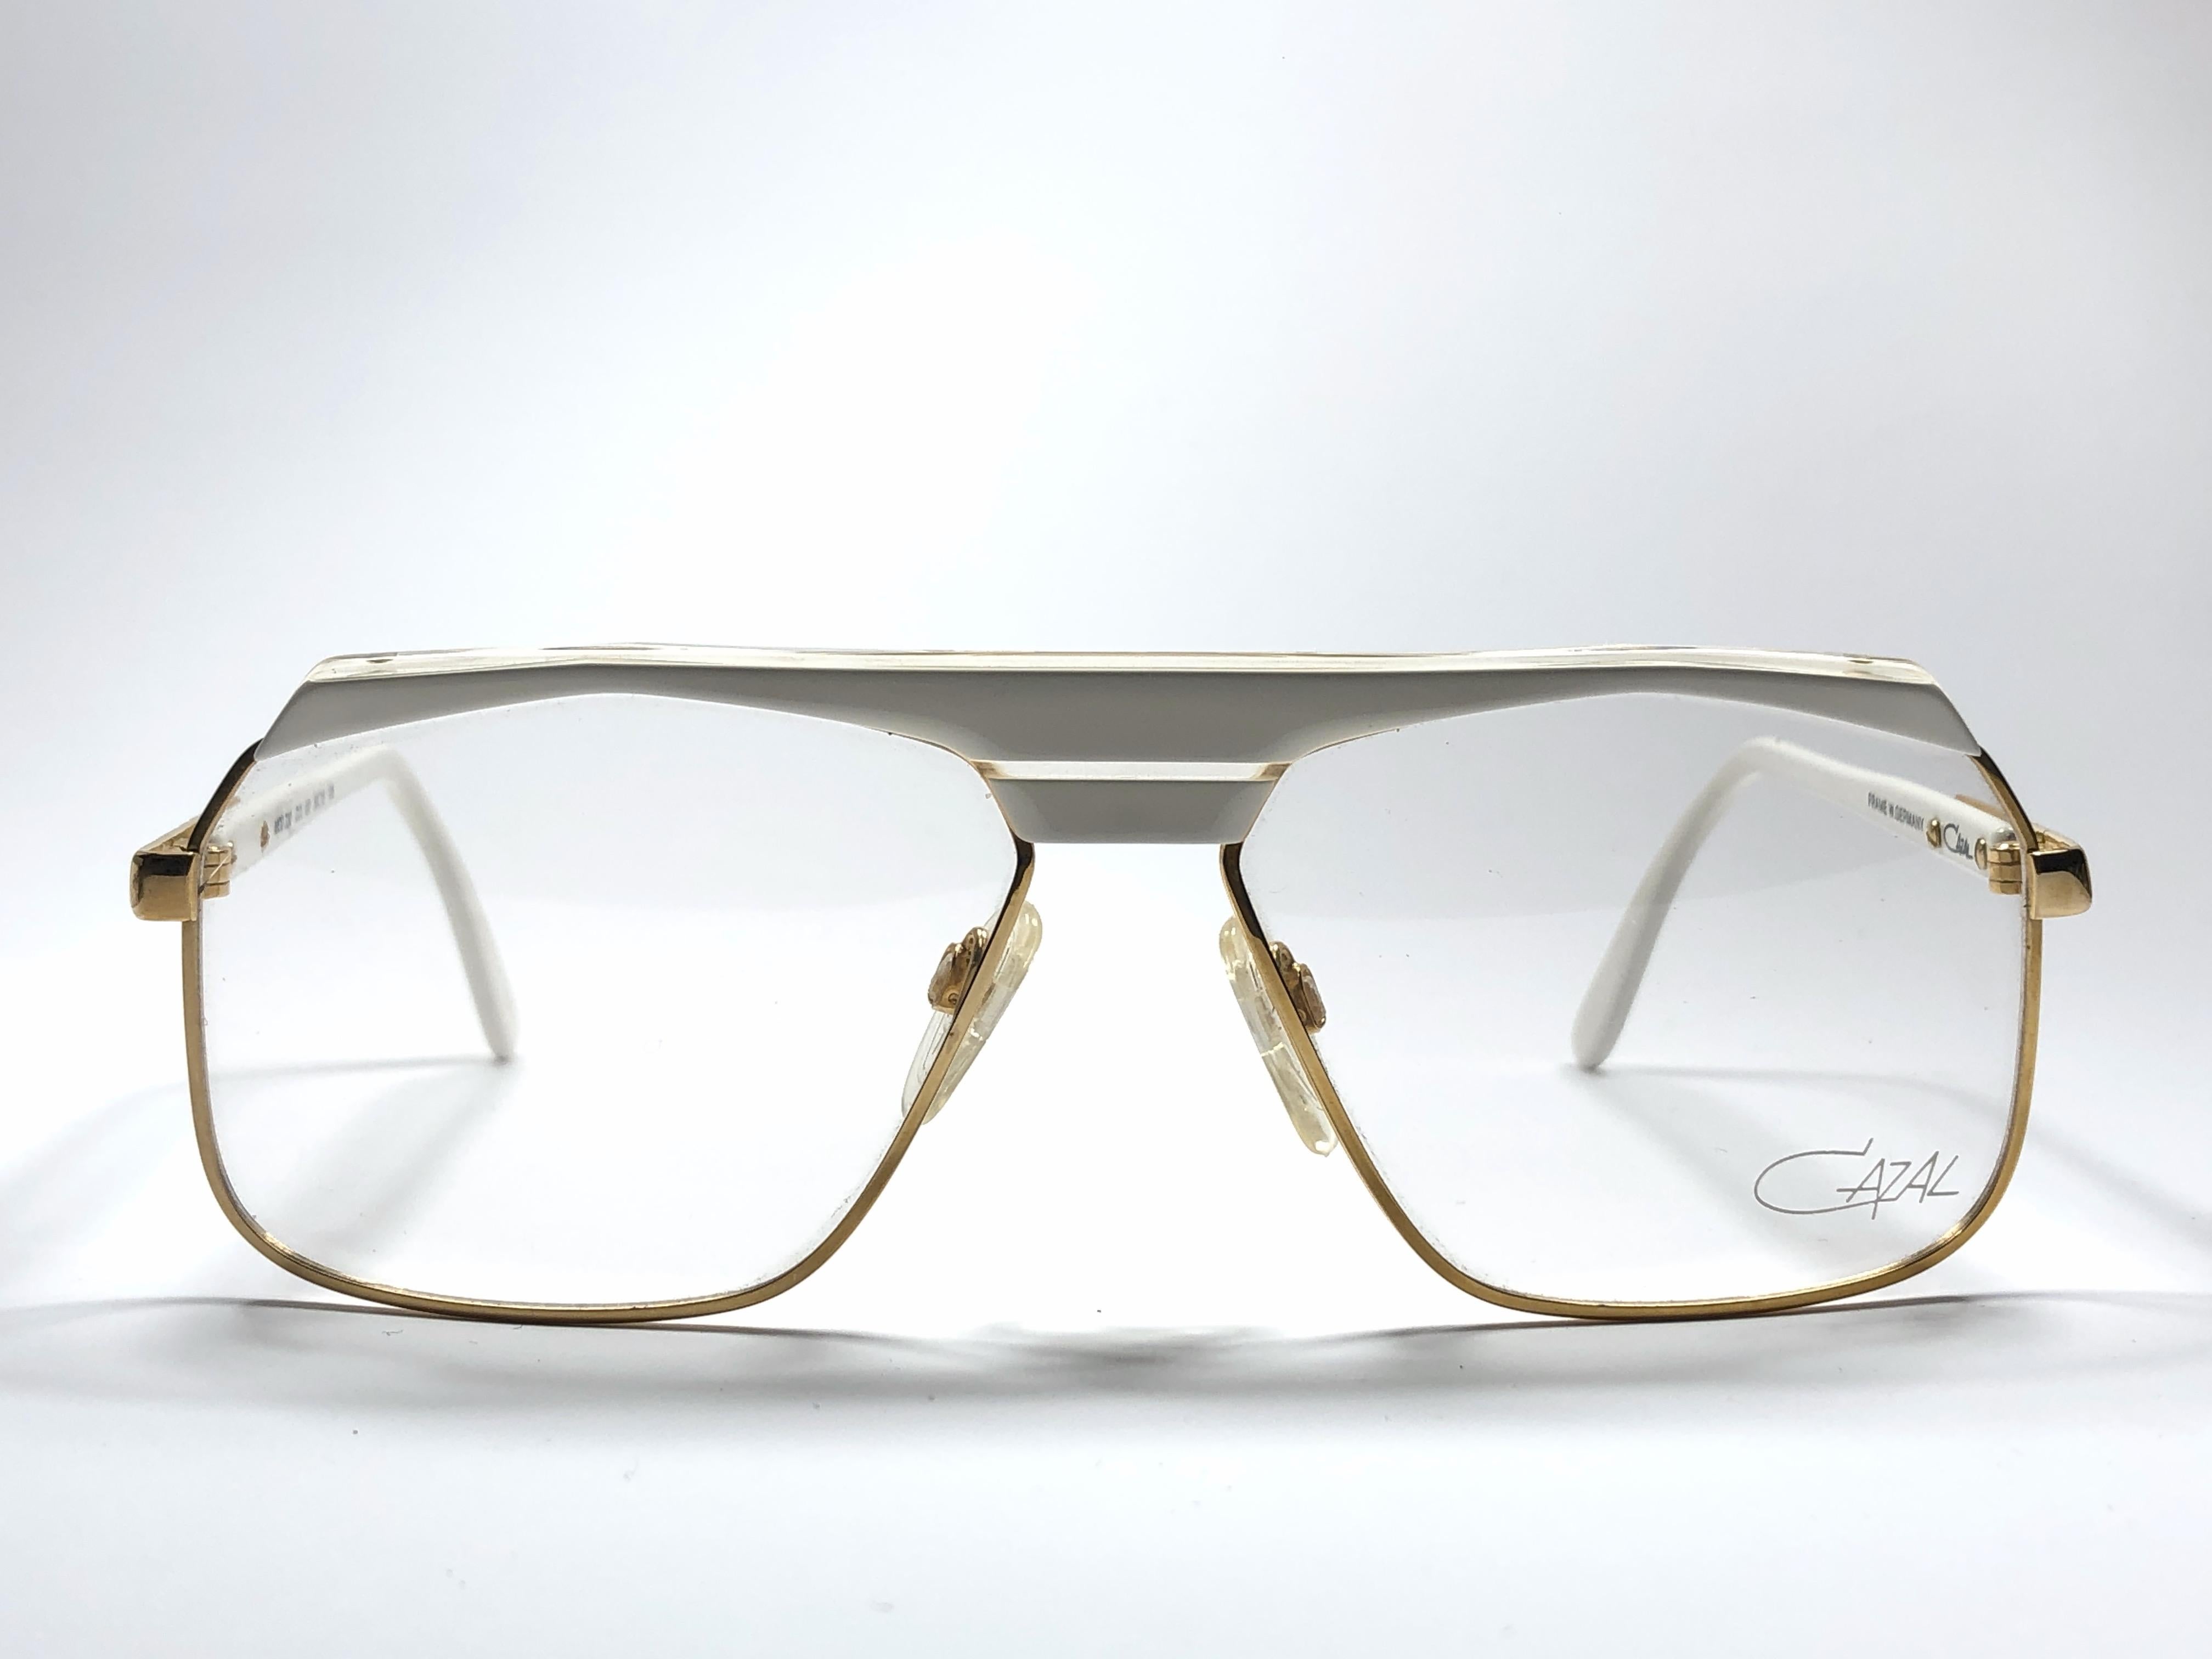 New Vintage Cazal 730 white with gold details frame. Perfect for reading spectacles. 

Comes with its original Cazal case. This item may show minor sign of wear due to storage.

Made in West Germany.